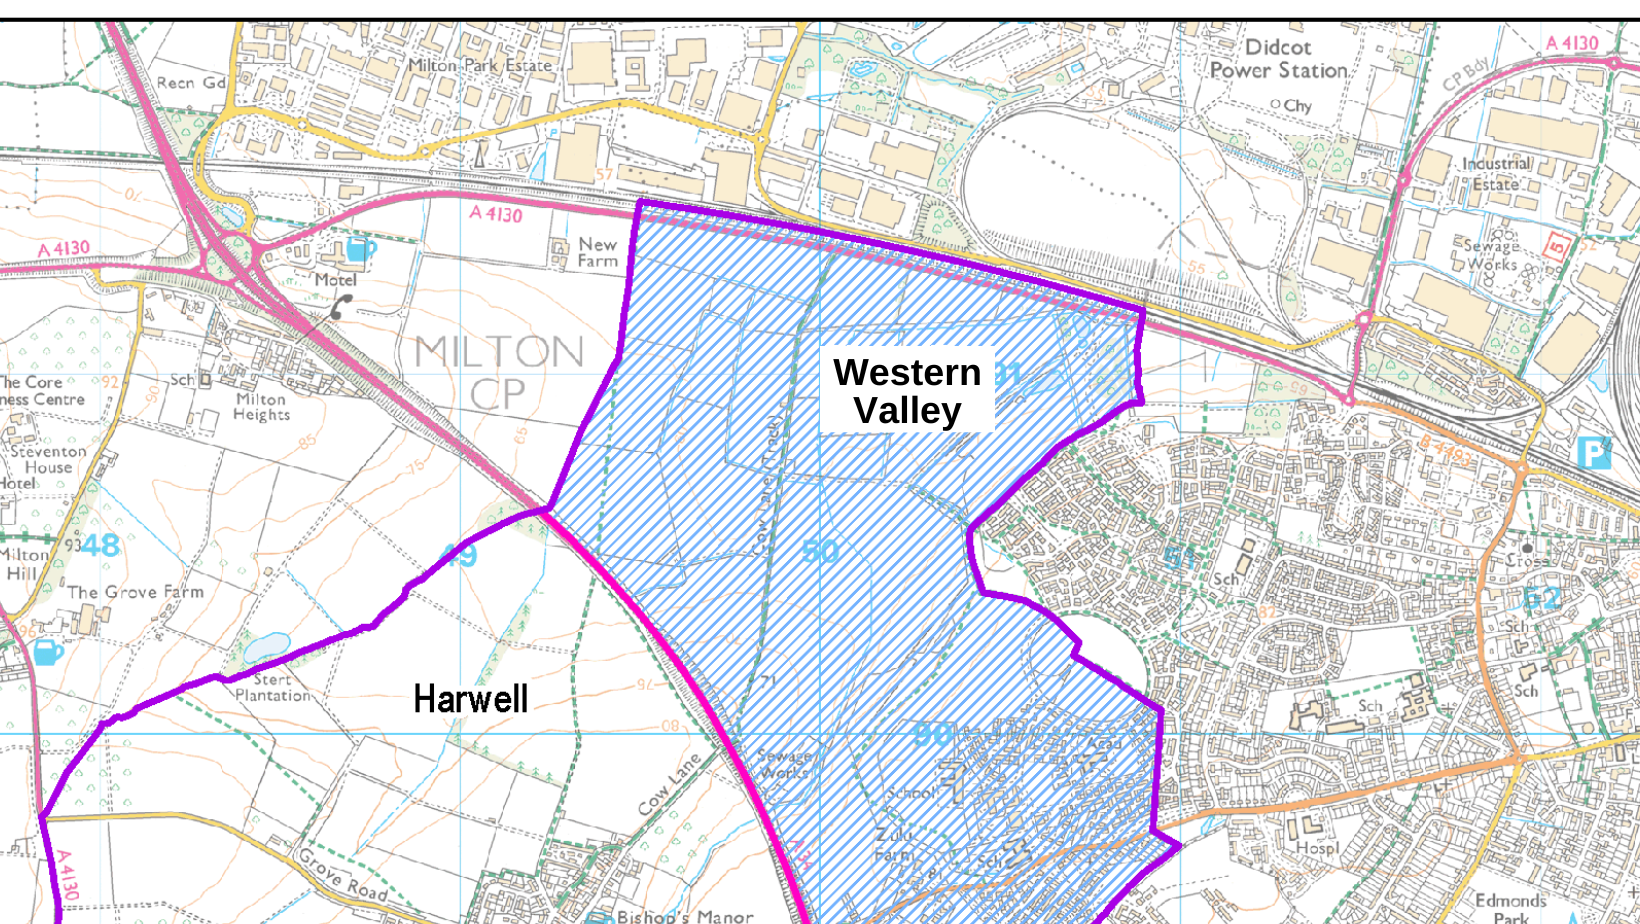 An Ordinance Survey map of the area of Harwell parish on the left and the new Western Valley Parish on the right including a section of Great Western Park in Didcot, and up to the railway line running alongside the A4130 between Didcot and Milton Heights.